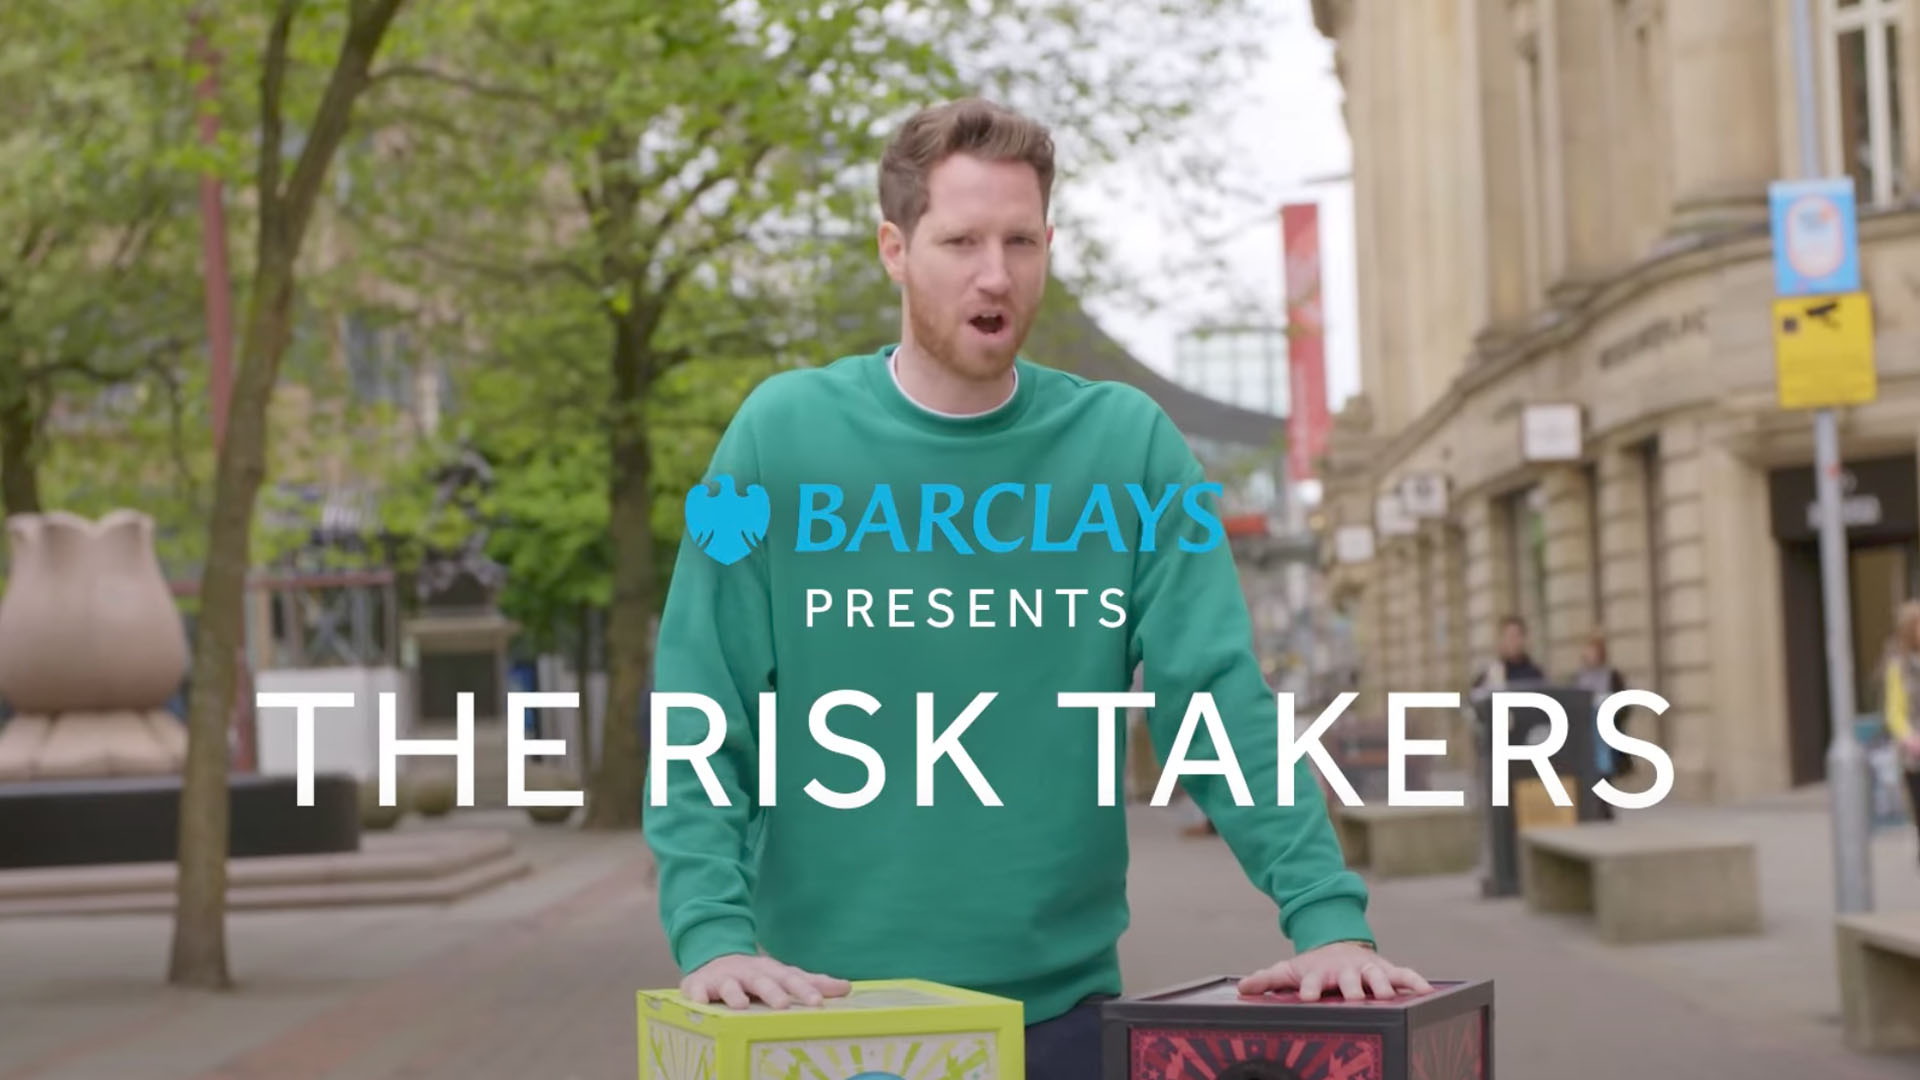 Barclays - Risk Takers